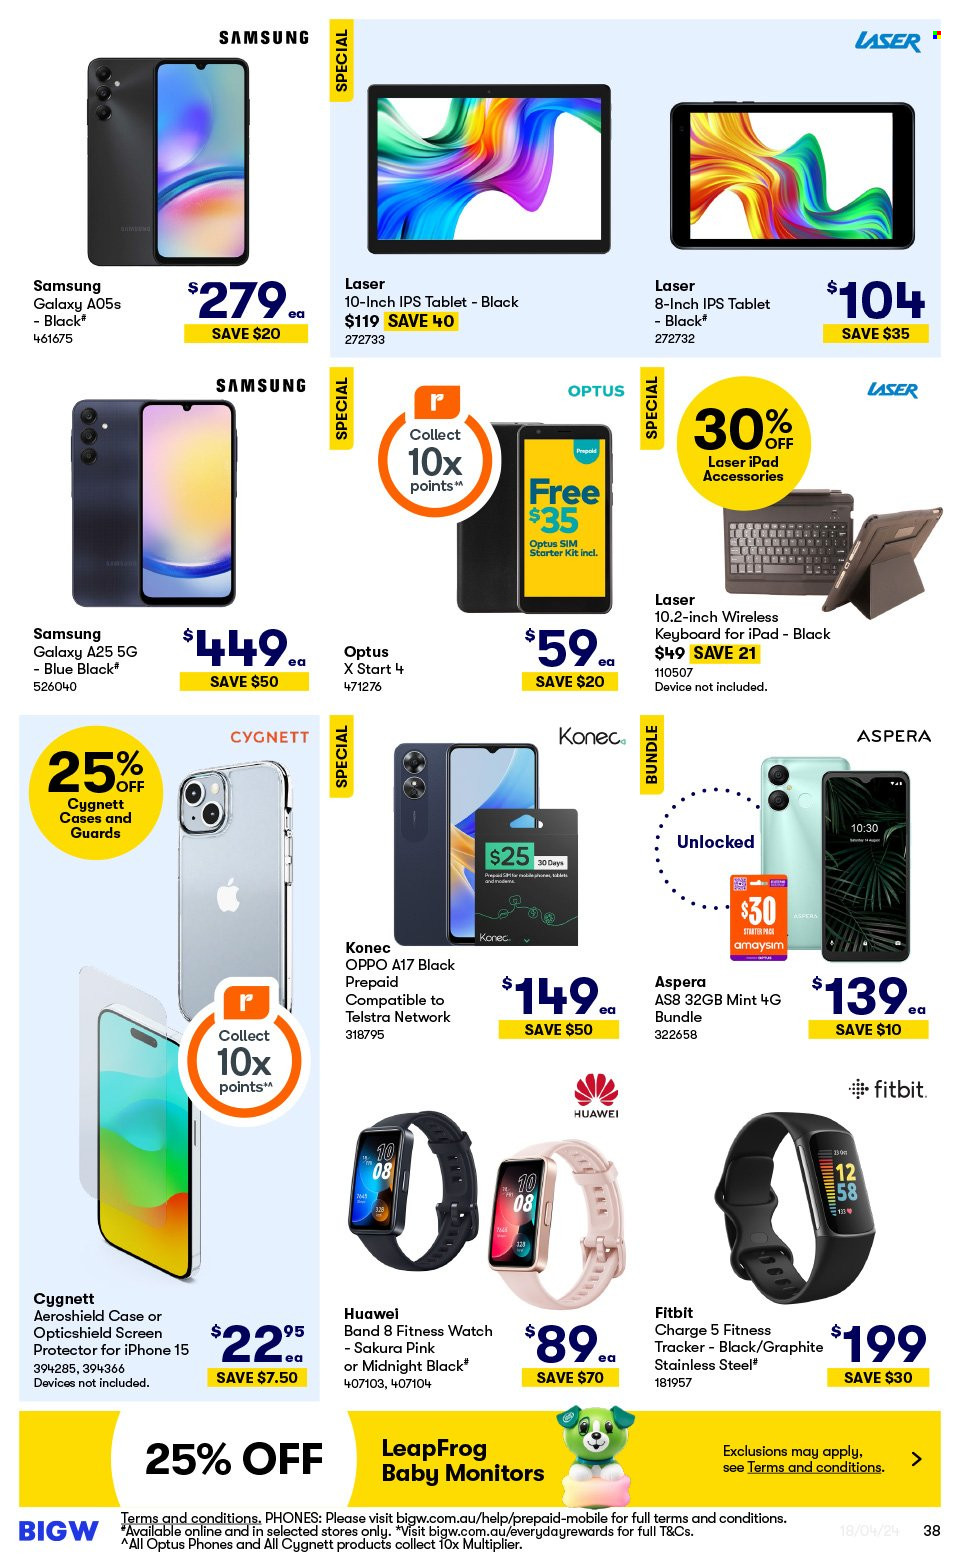 thumbnail - BIG W Catalogue - Sales products - Apple, tablet, Huawei, Samsung Galaxy, keyboard, Samsung, Oppo, phone, smartphone, Optus, Aspera, SIM card, Fitbit, fitness smart watch, fitness tracker, monitor, laser, LeapFrog, mint. Page 38.